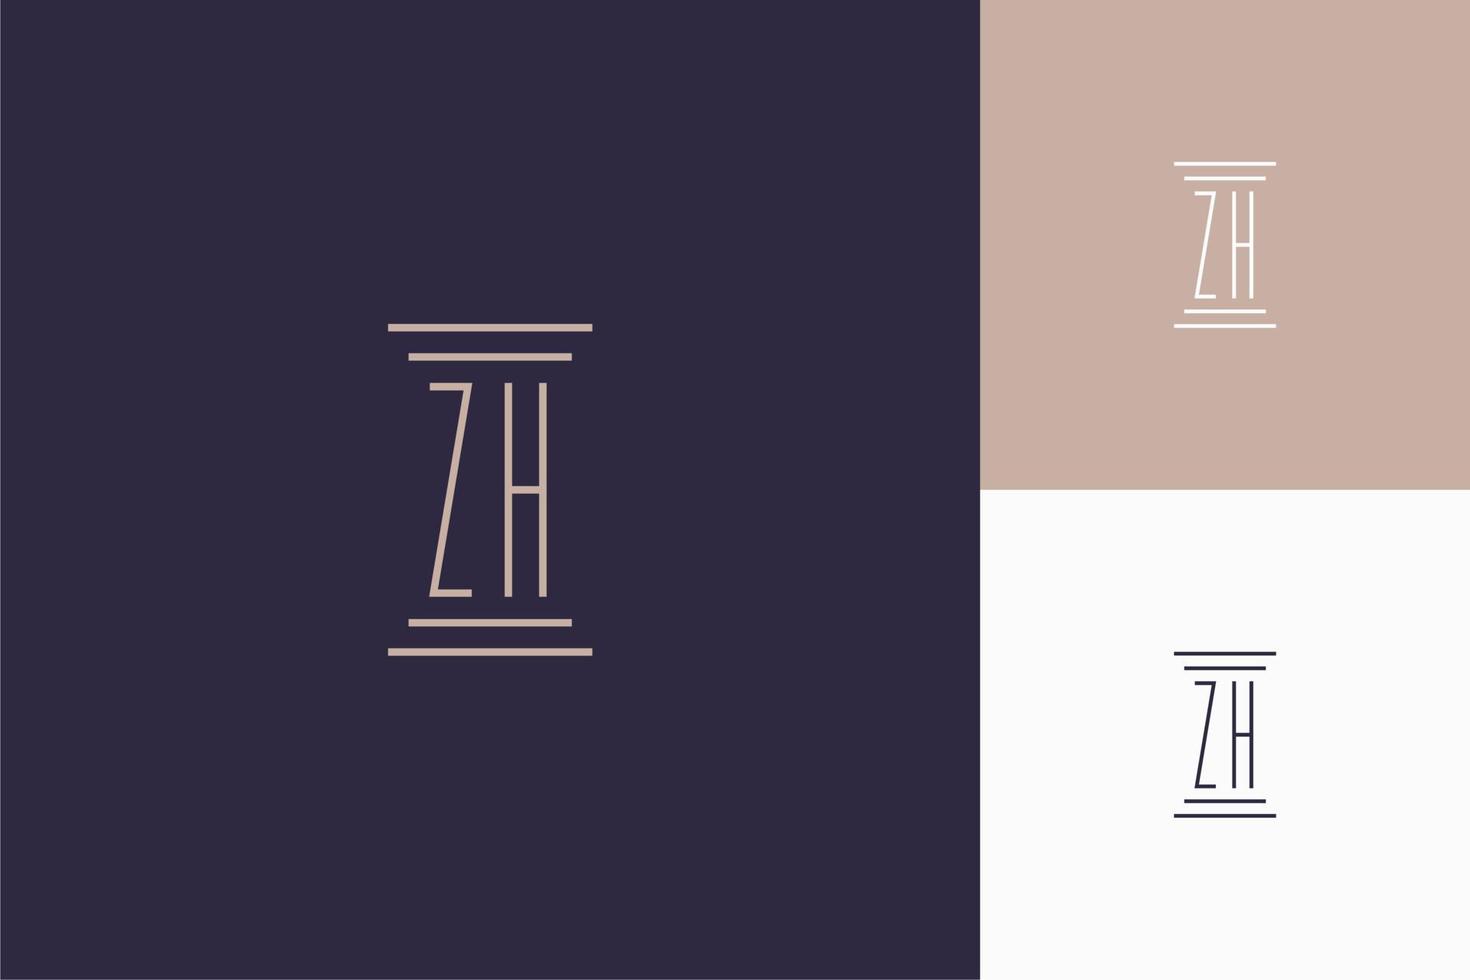 ZH monogram initials design for law firm logo vector